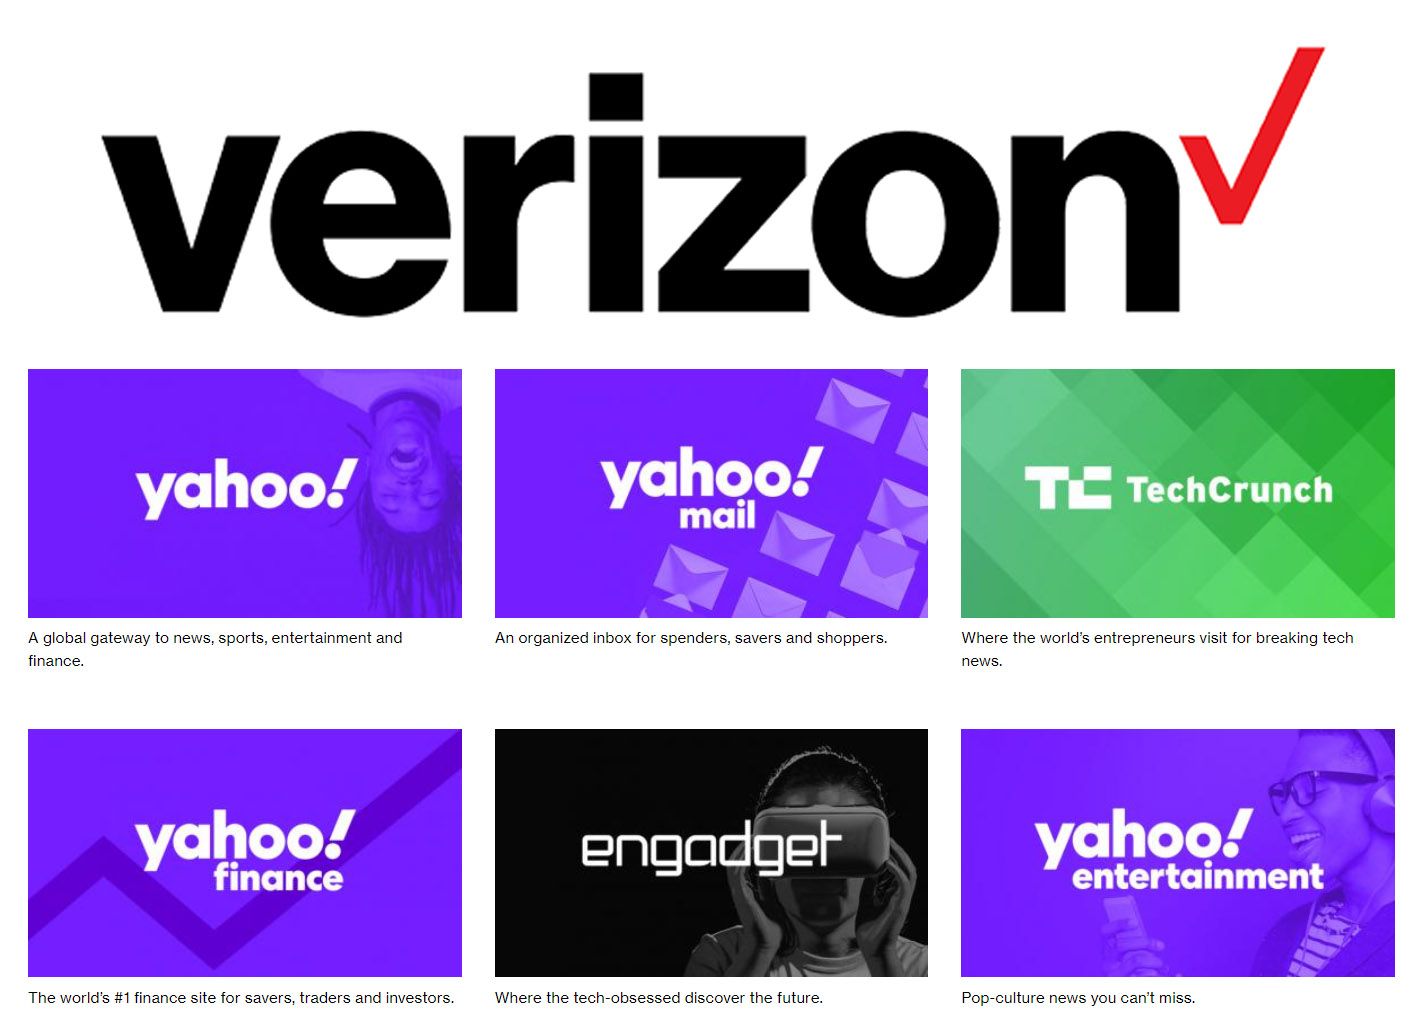 Internet trailblazers Yahoo and AOL are sold again, for $5 Billion